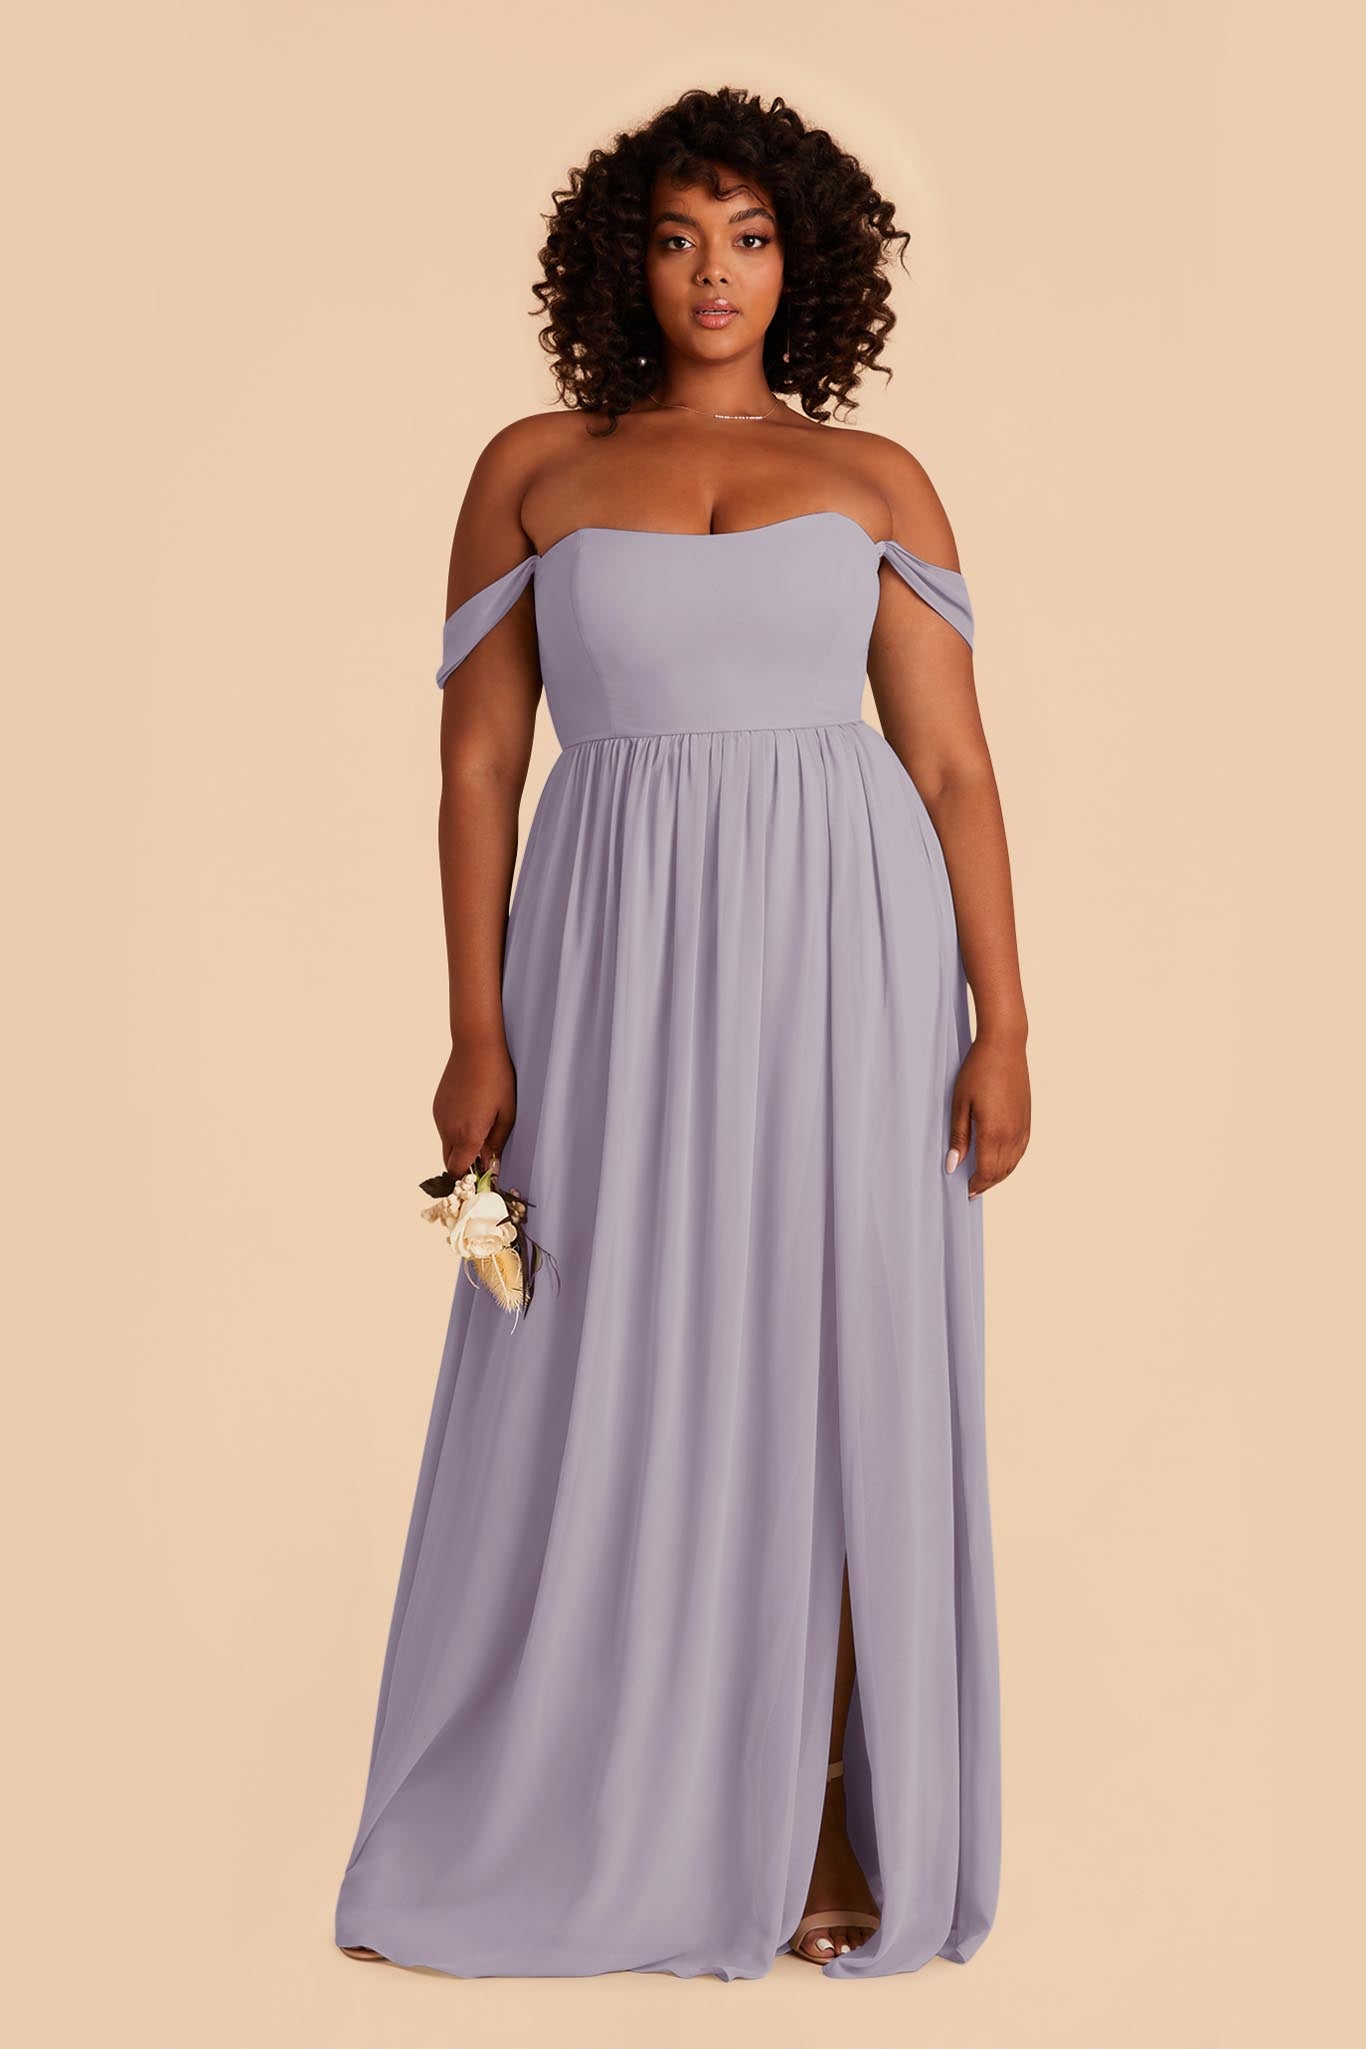 Dusty Lilac August Convertible Dress by Birdy Grey